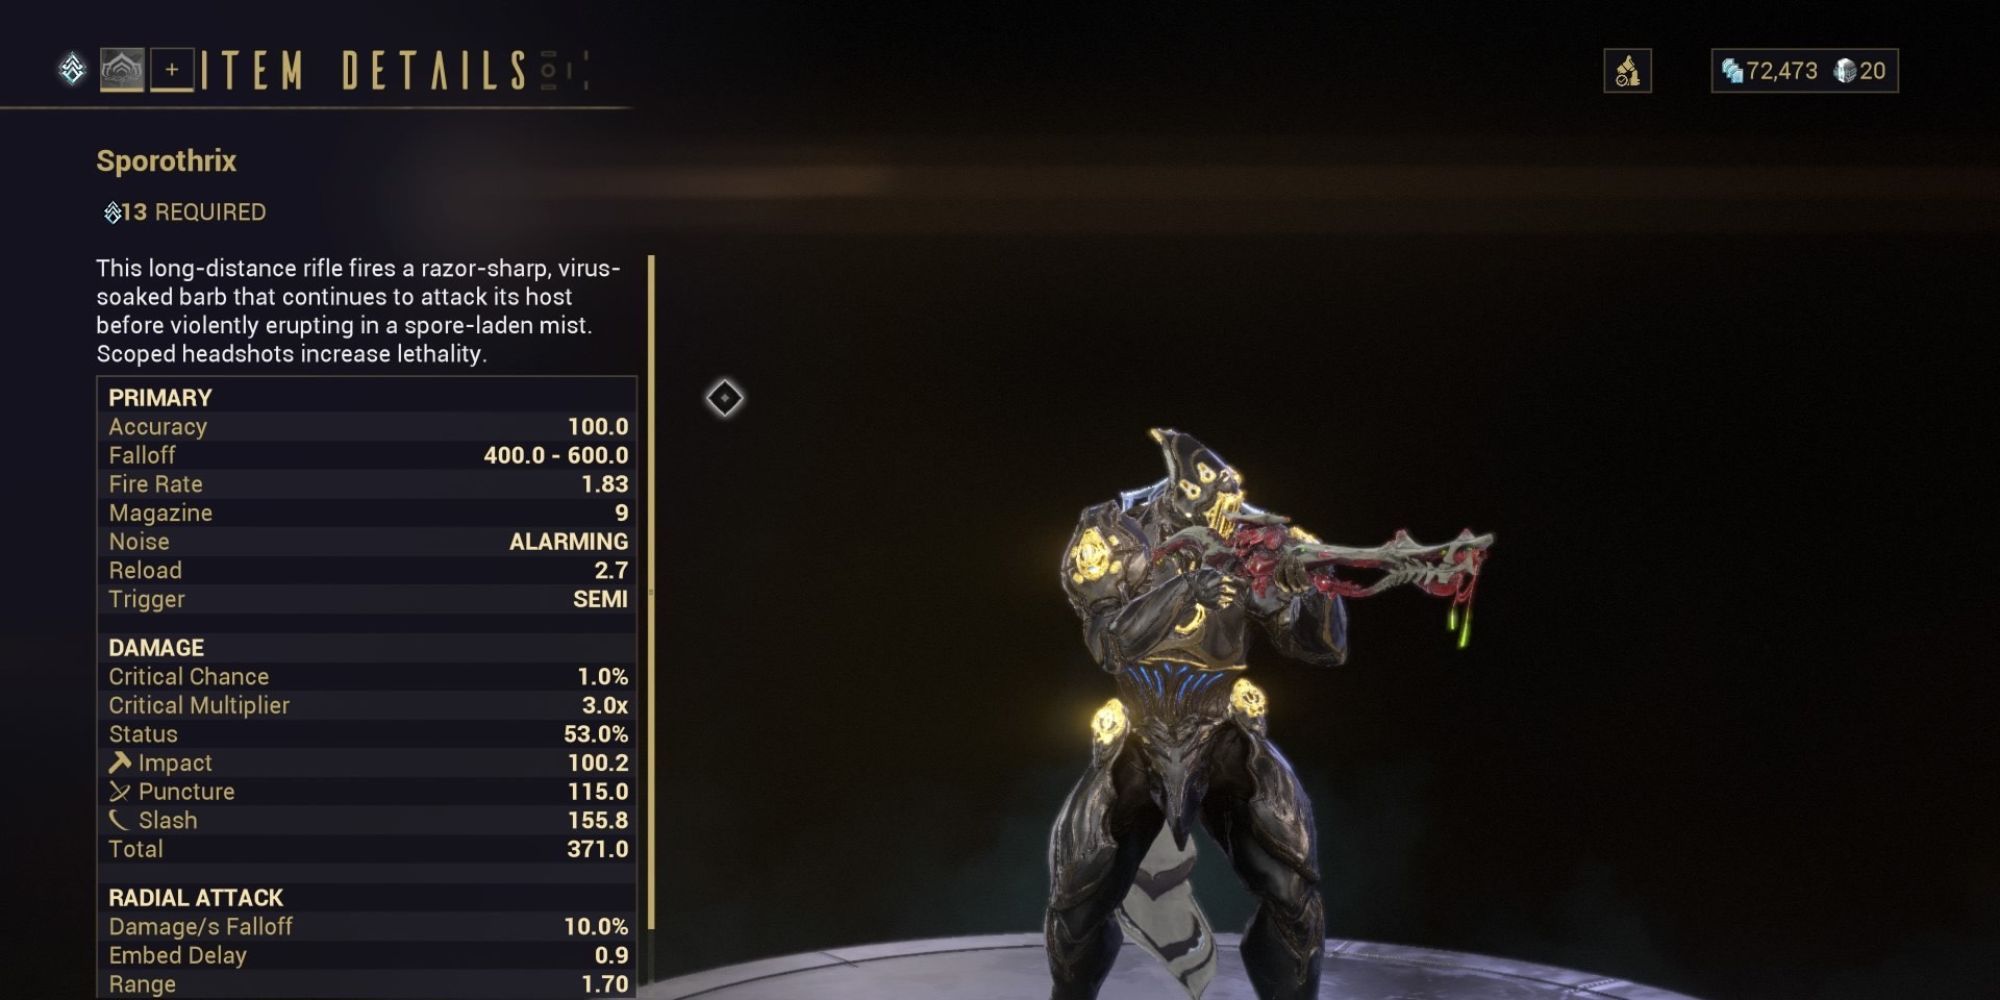 The Sporothrix sniper rifle preview page on Warframe